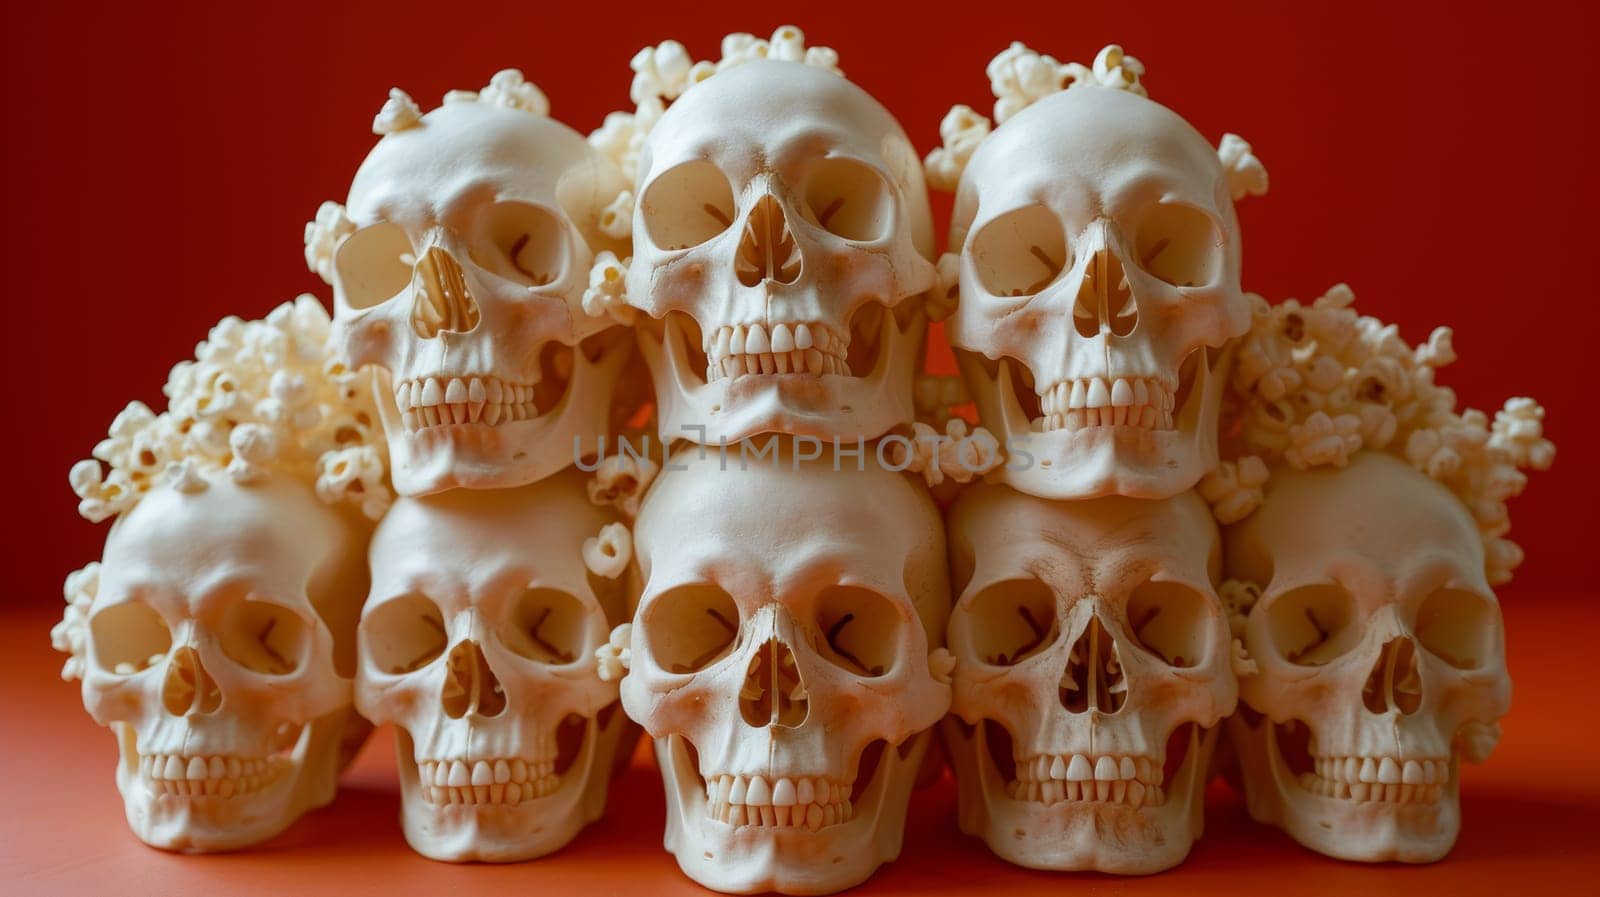 A pile of human skulls with popcorn on top, AI by starush